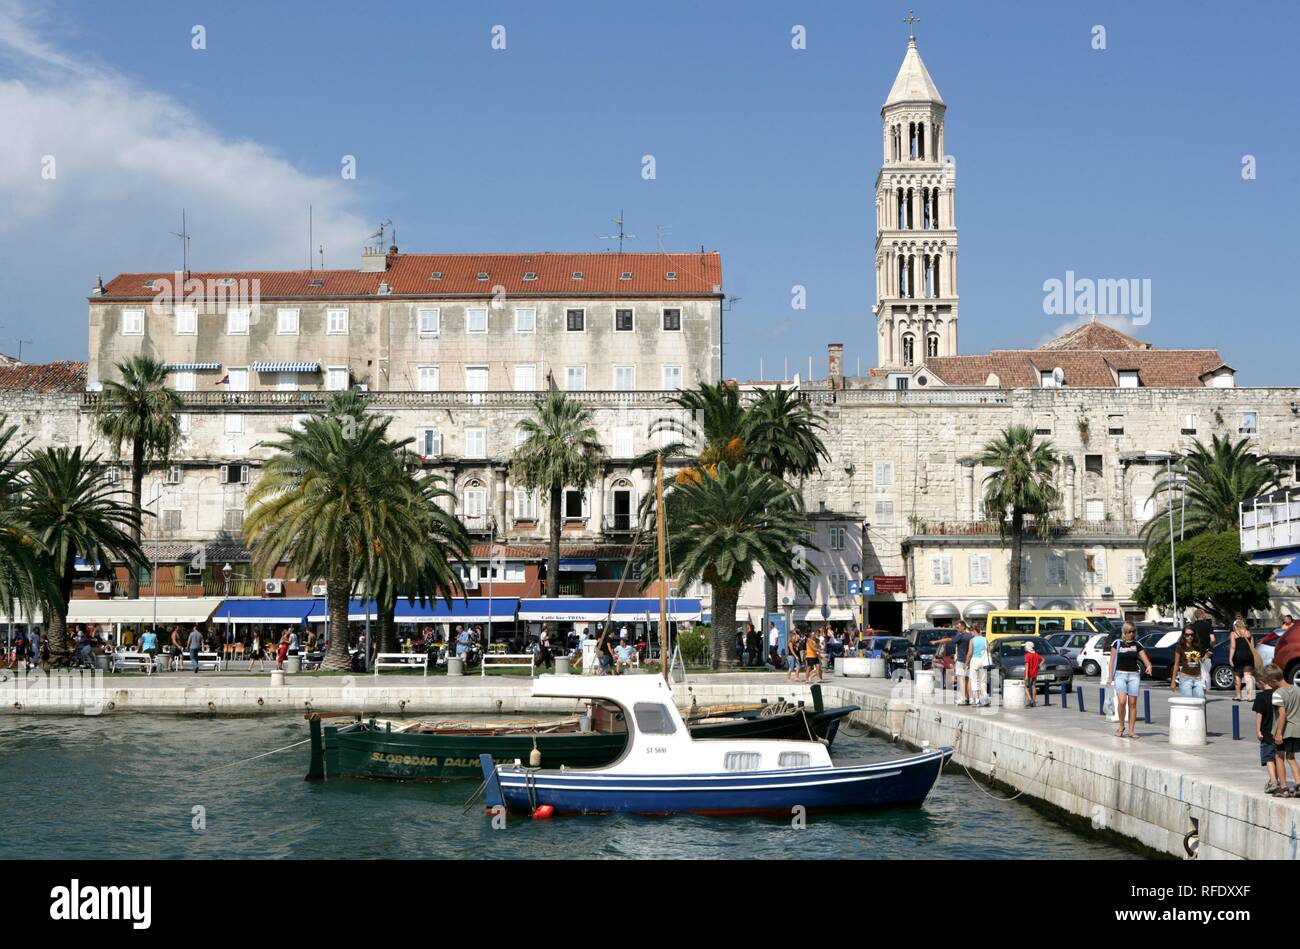 Old part of town, tower of the Sveti Duje cathedral, Split, Middle Dalmatia, Croatia Stock Photo